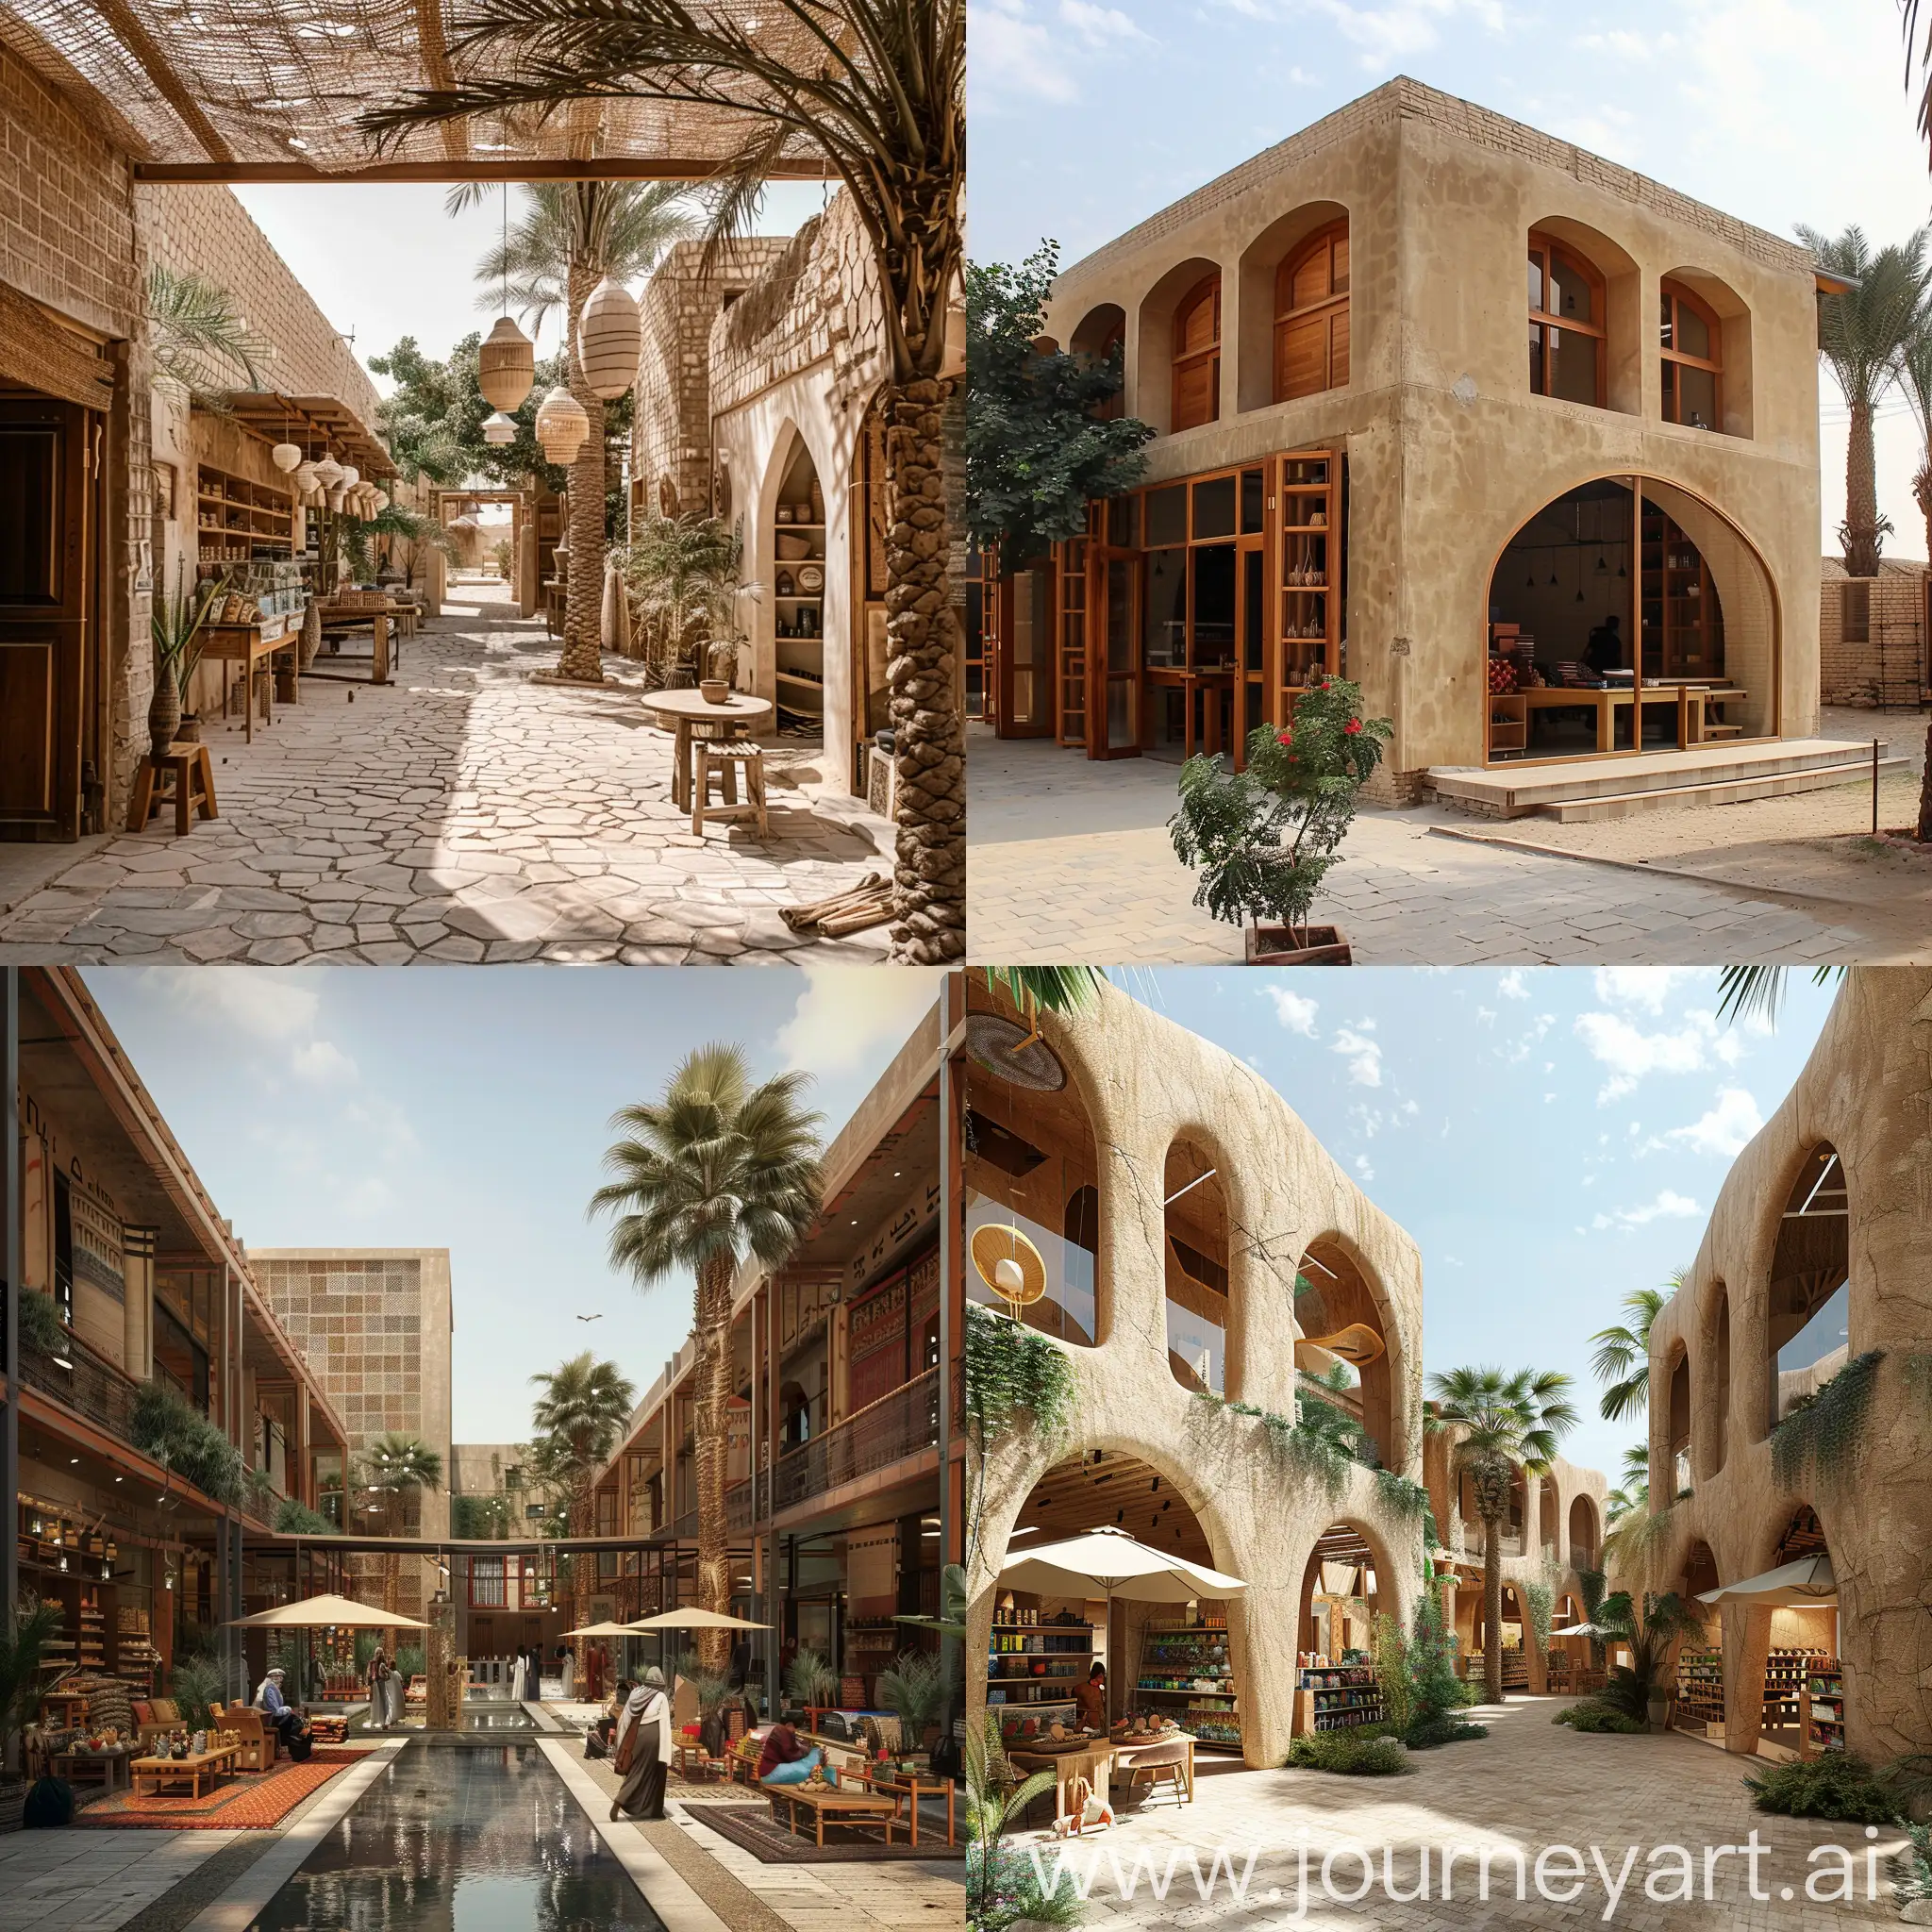 A heritage and commercial complex for selling handmade products, built in Egypt from local materials and affiliated with green and modern architecture.